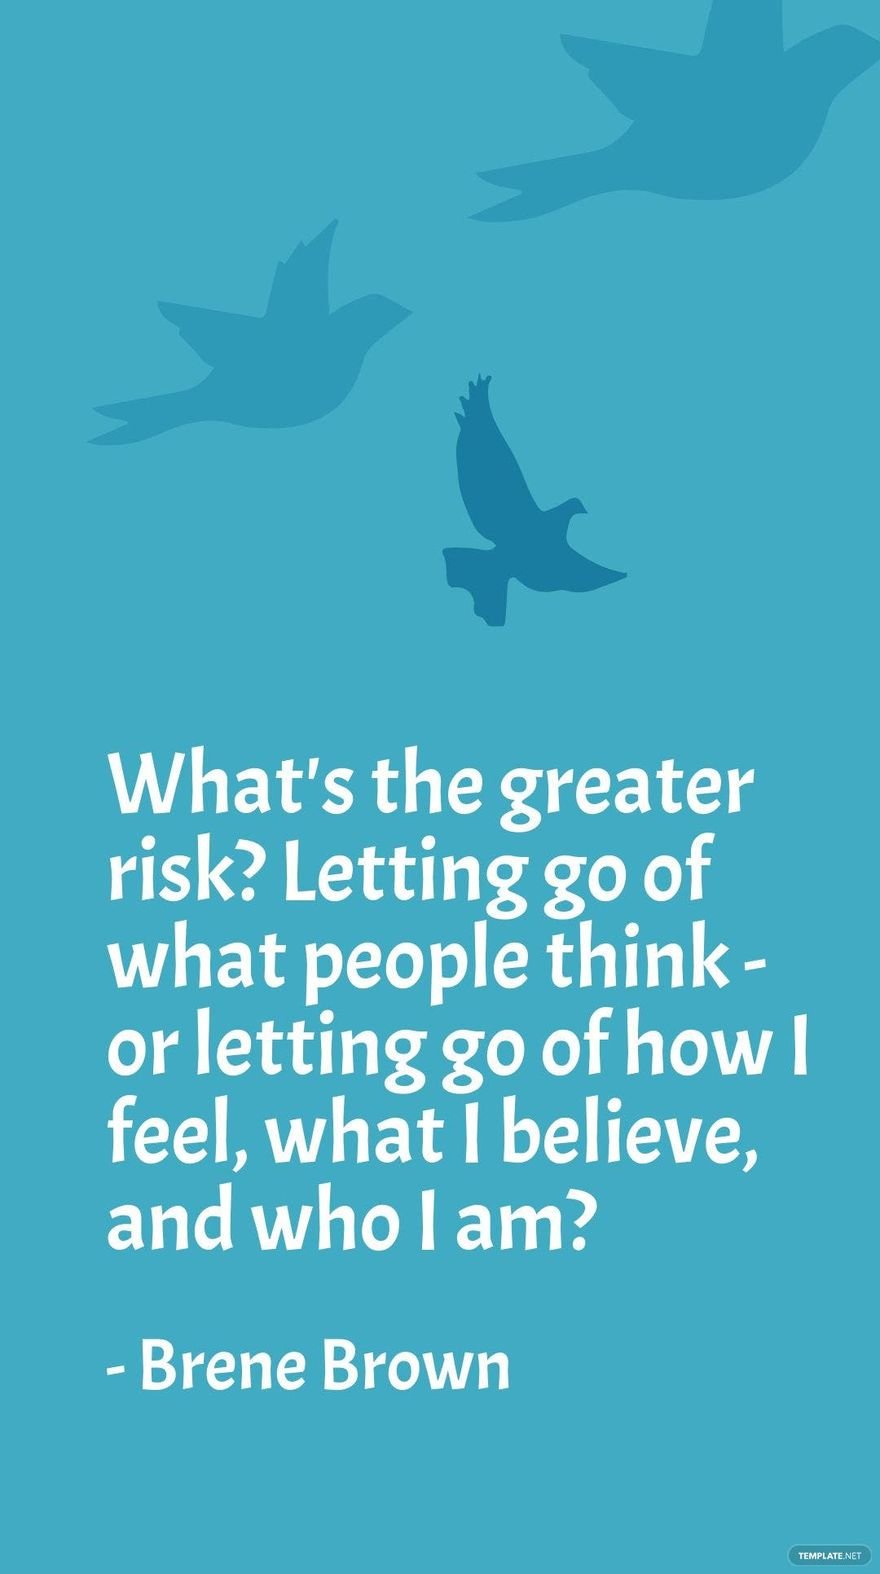 Brene Brown - What's the greater risk? Letting go of what people think - or letting go of how I feel, what I believe, and who I am?